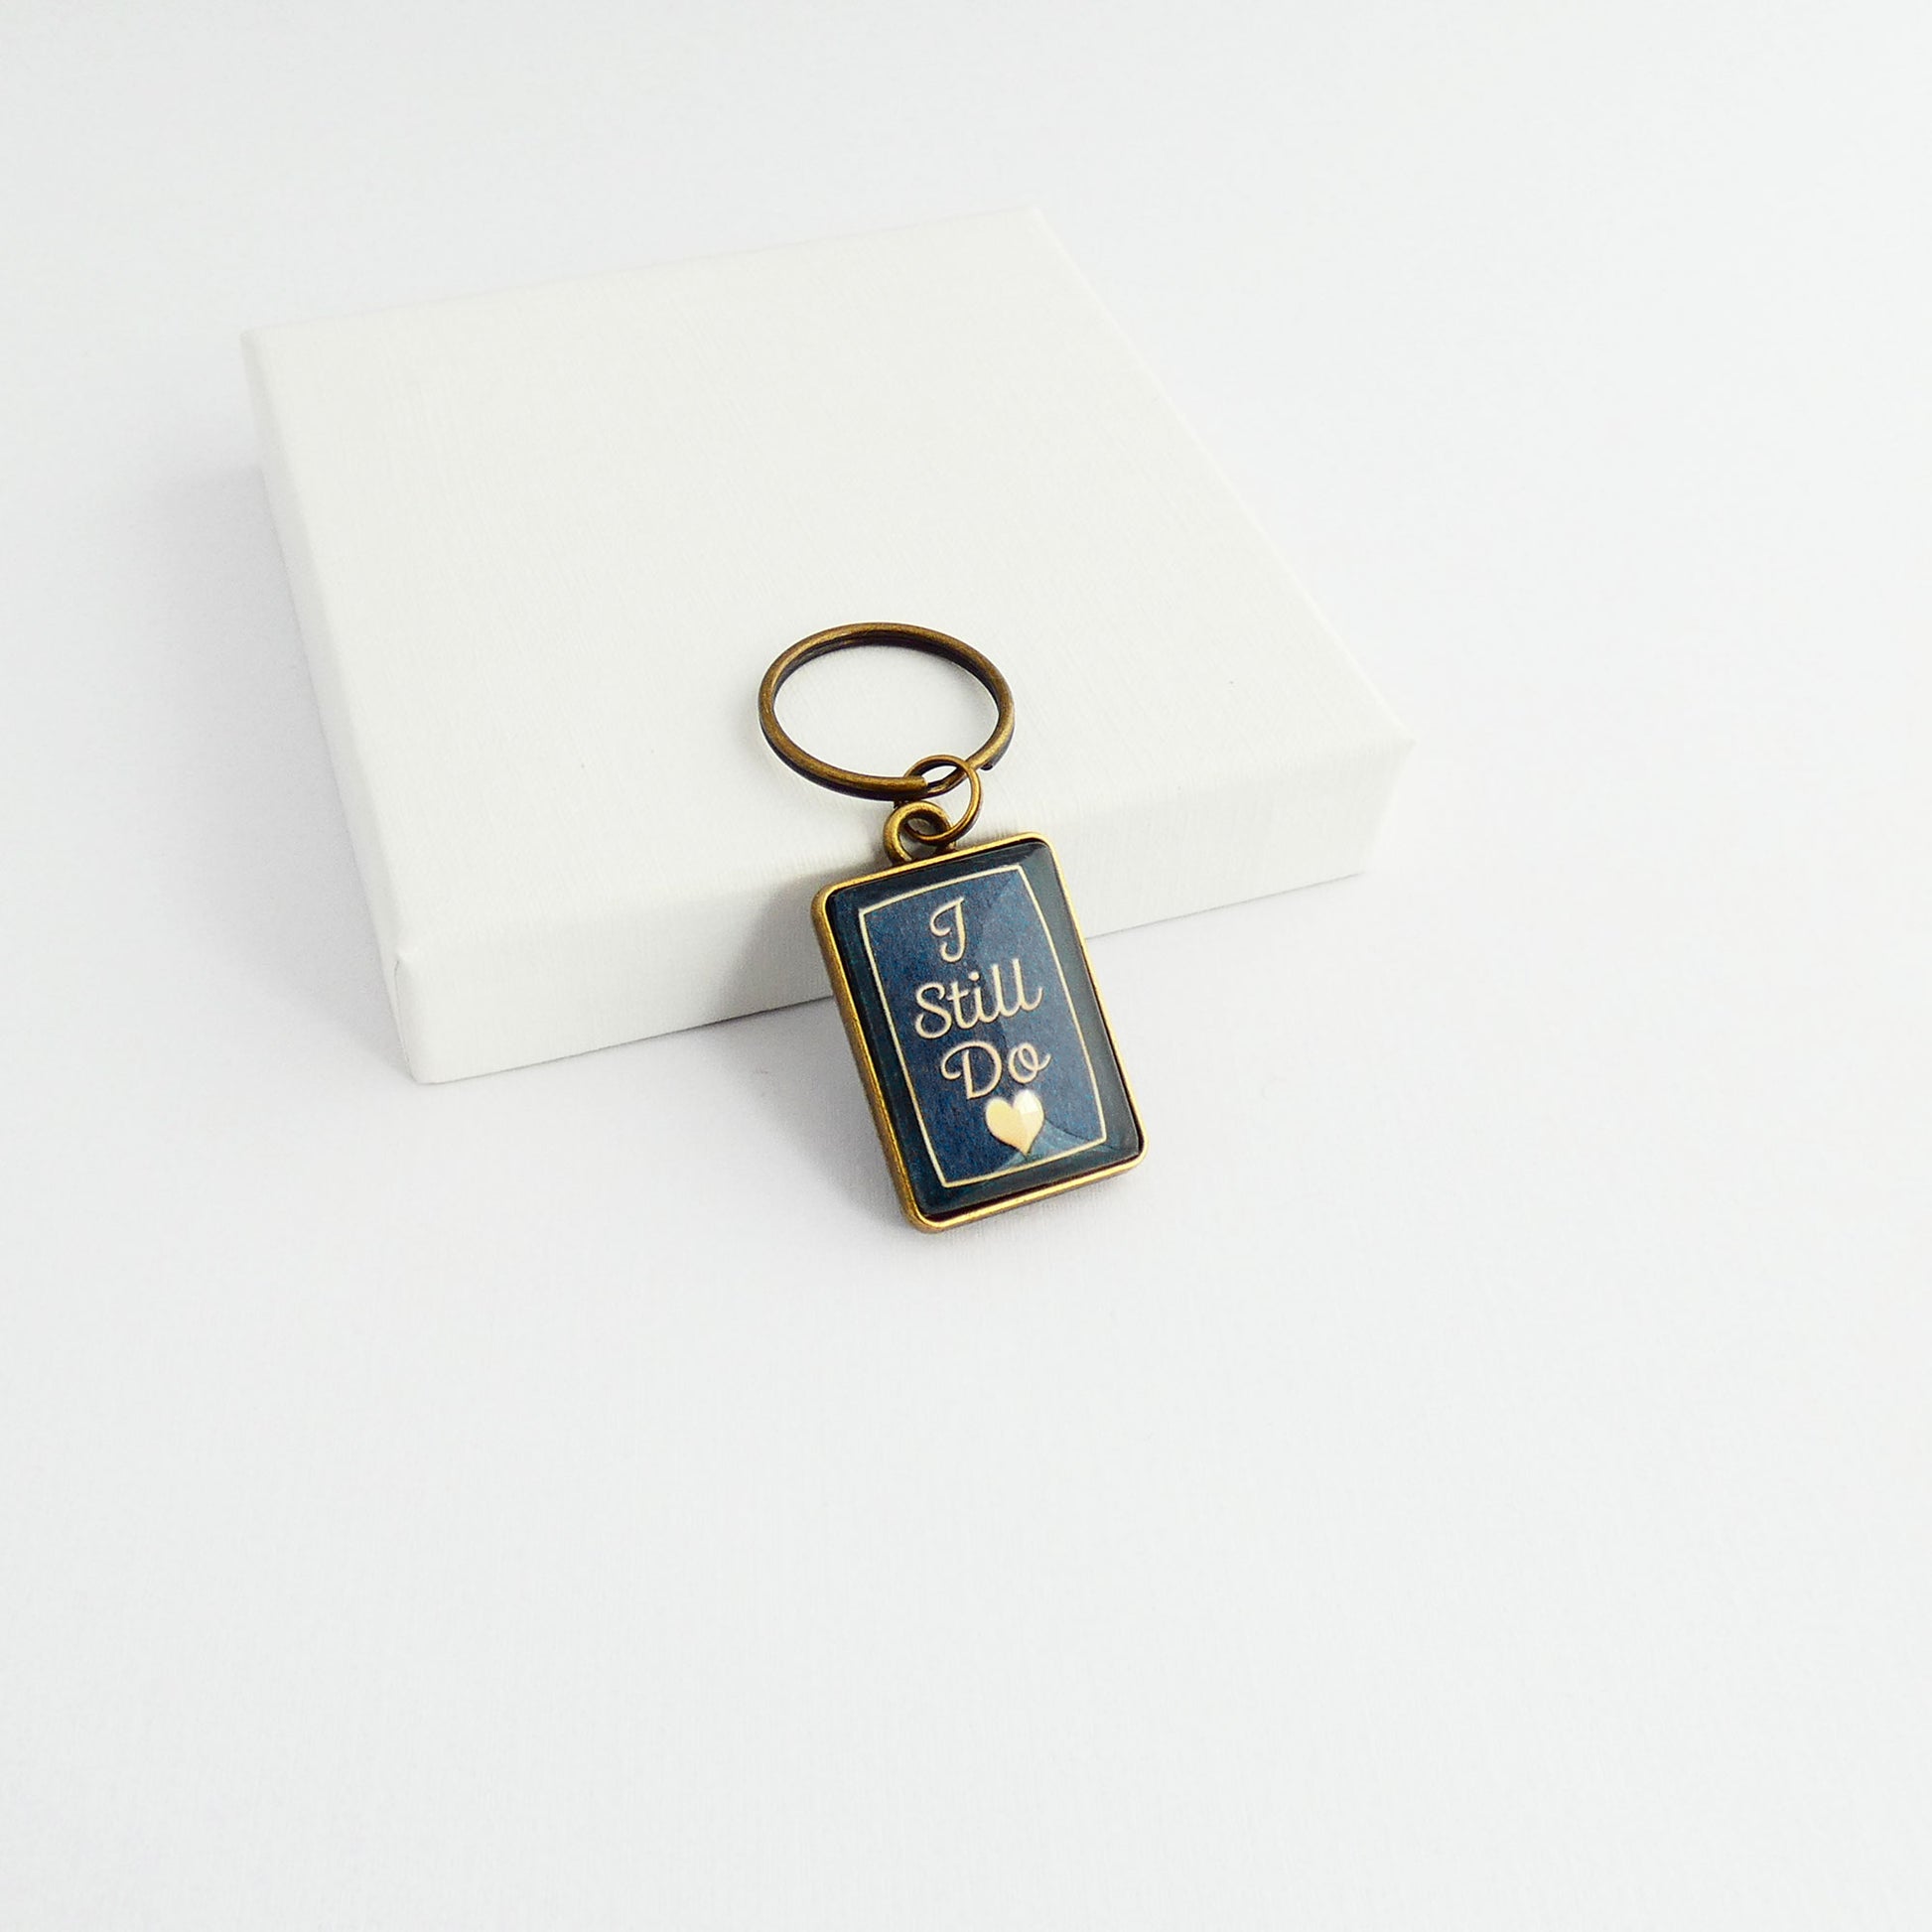 A double sided bronze and navy blue rectangle keyrings showing the front side with the words 'I still do' 